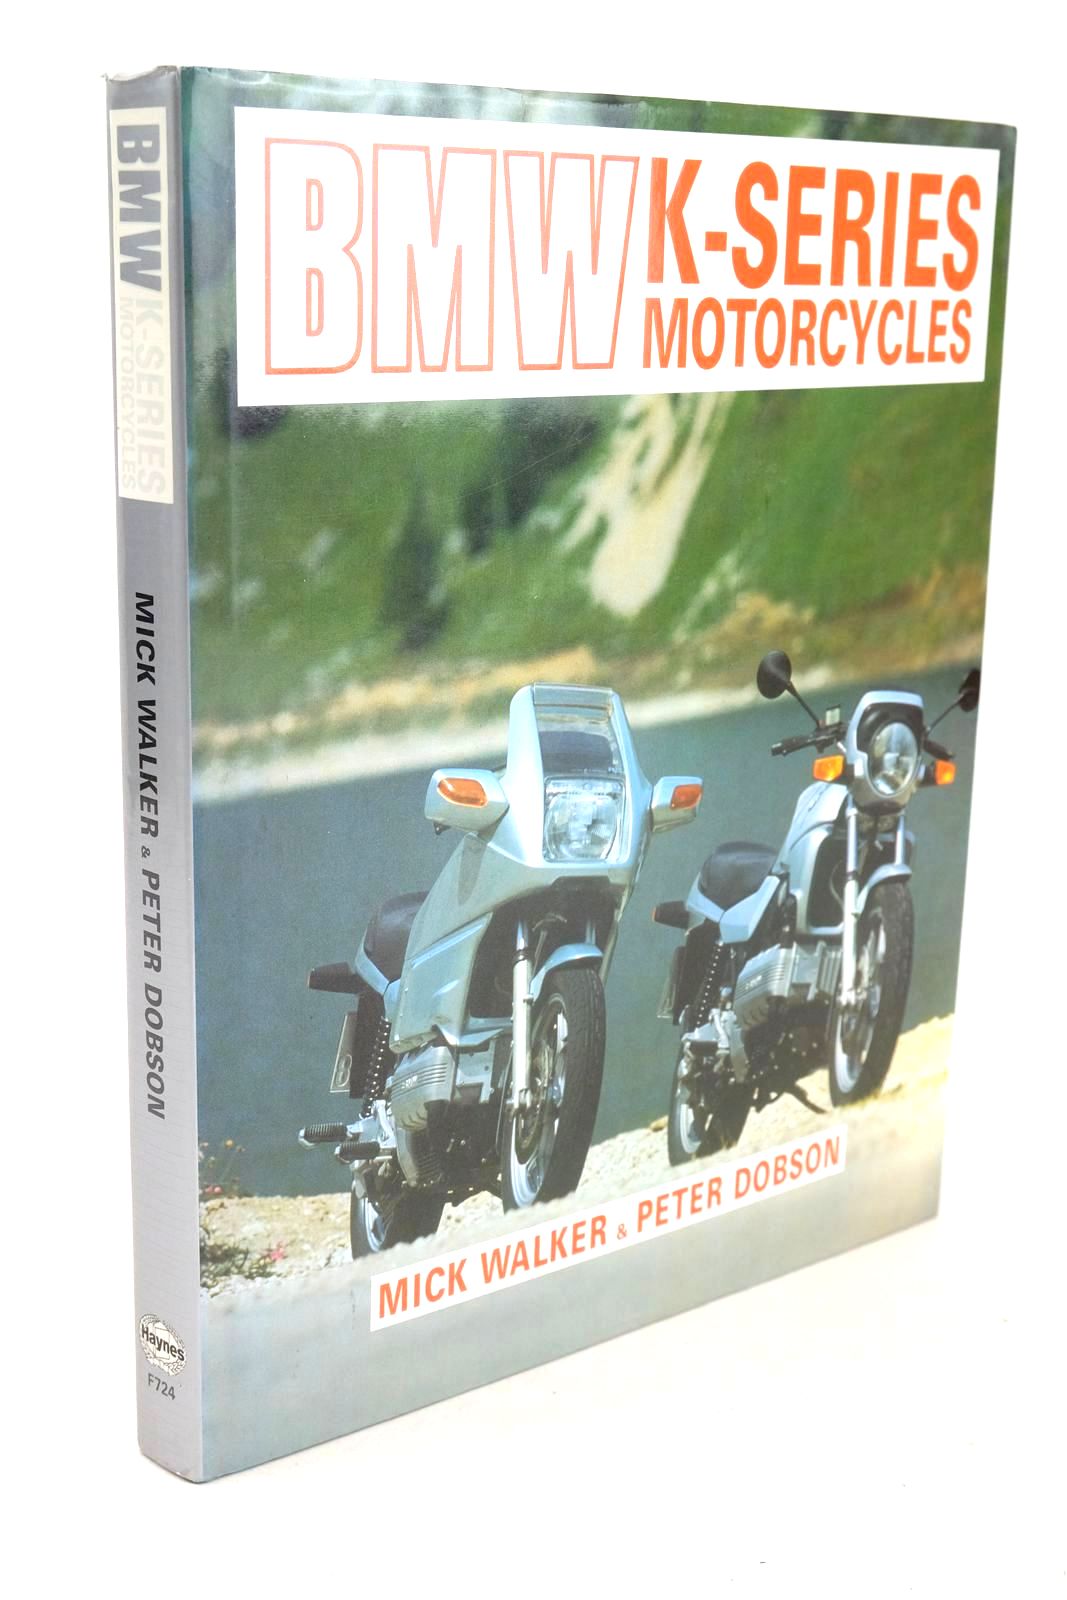 Photo of BMW K-SERIES MOTORCYCLES- Stock Number: 1326185